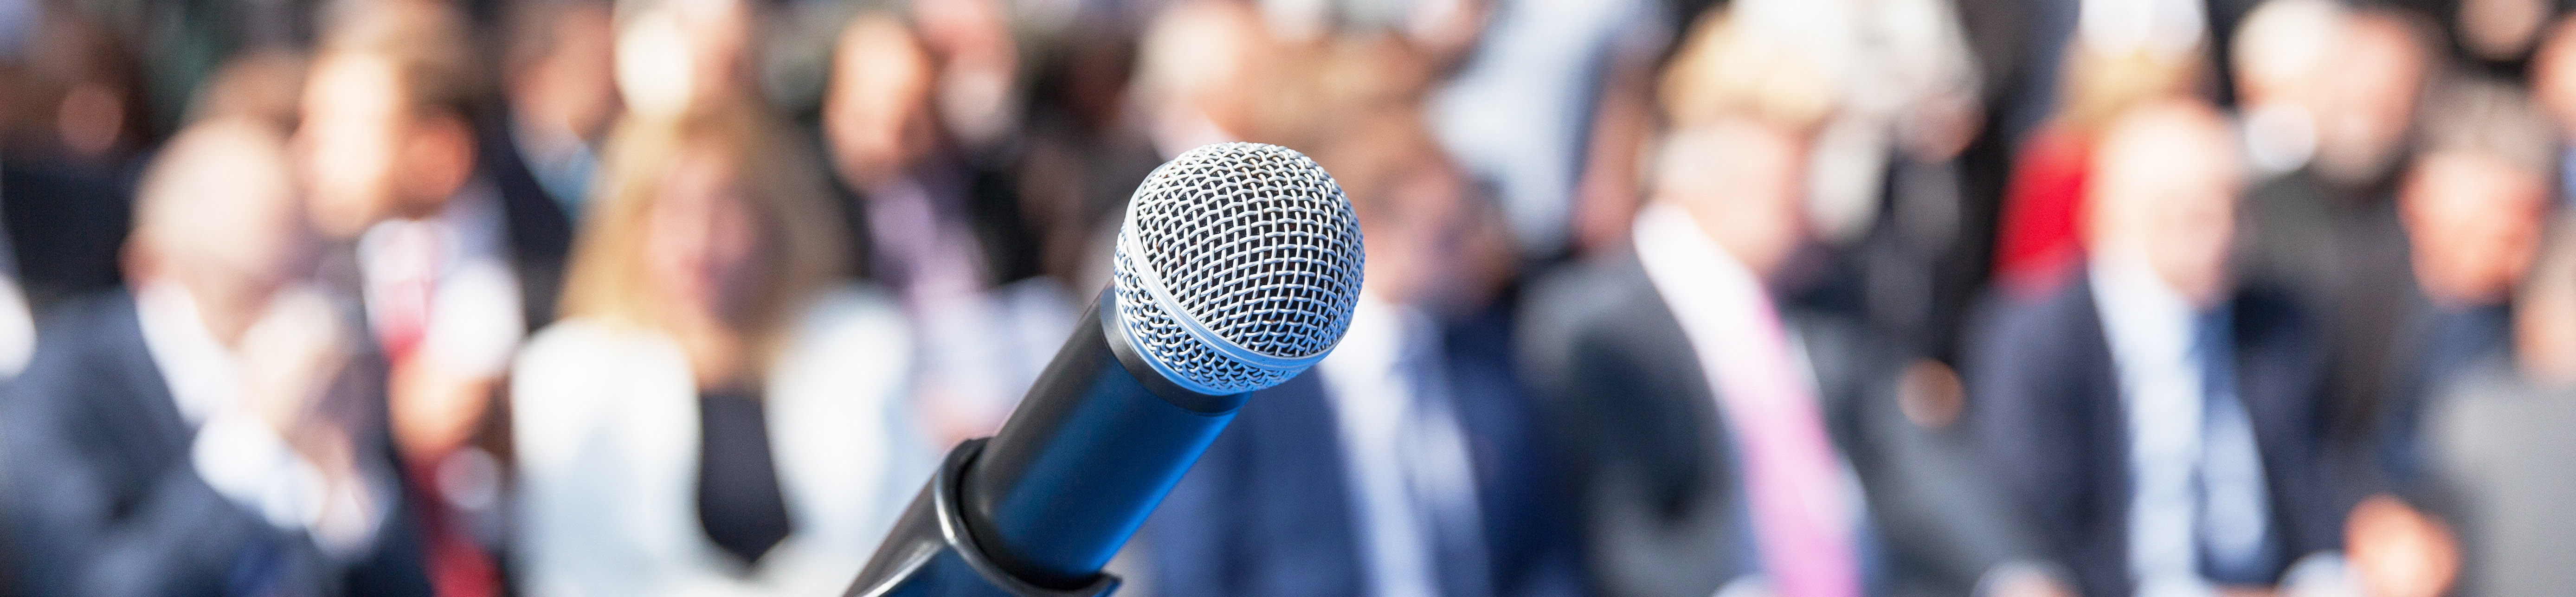 Image of a microphone with audience in the background